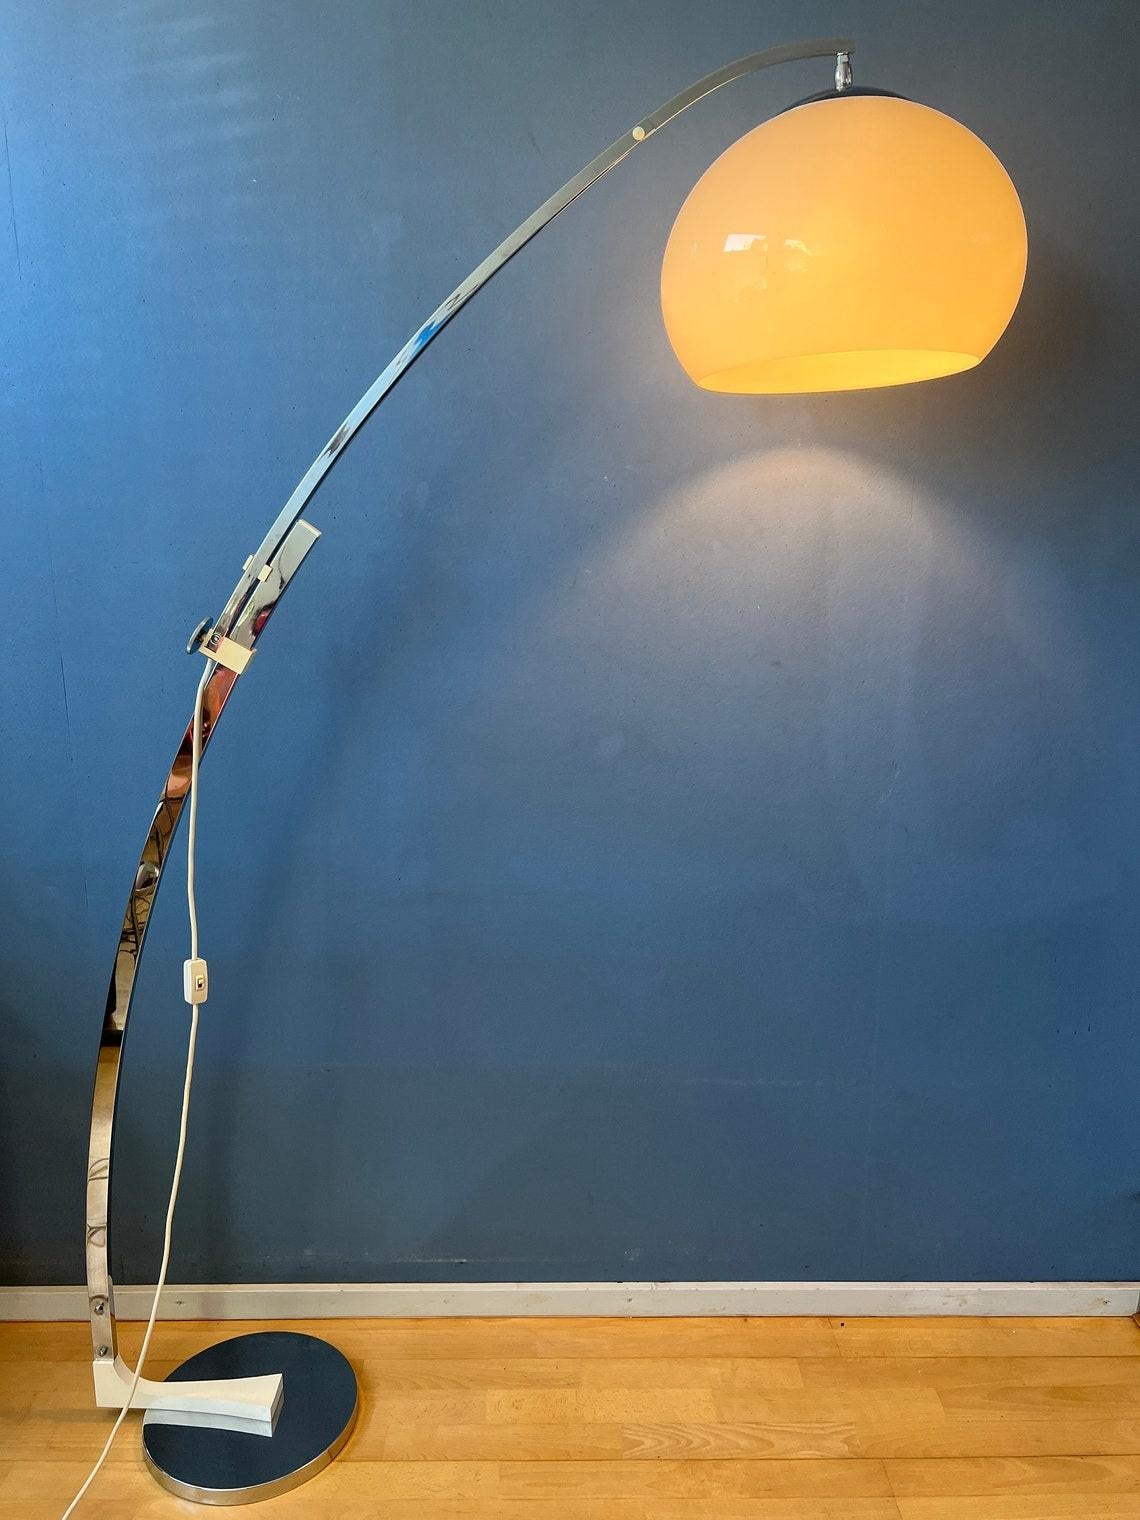 Very rare space age arc floor lamp with mushroom shade by the German Sölken Leuchten. The white shade produces a warm and delicate glow. The height/length of the lamp can be adjusted with its extendable arm. This design allows the lamp to extend